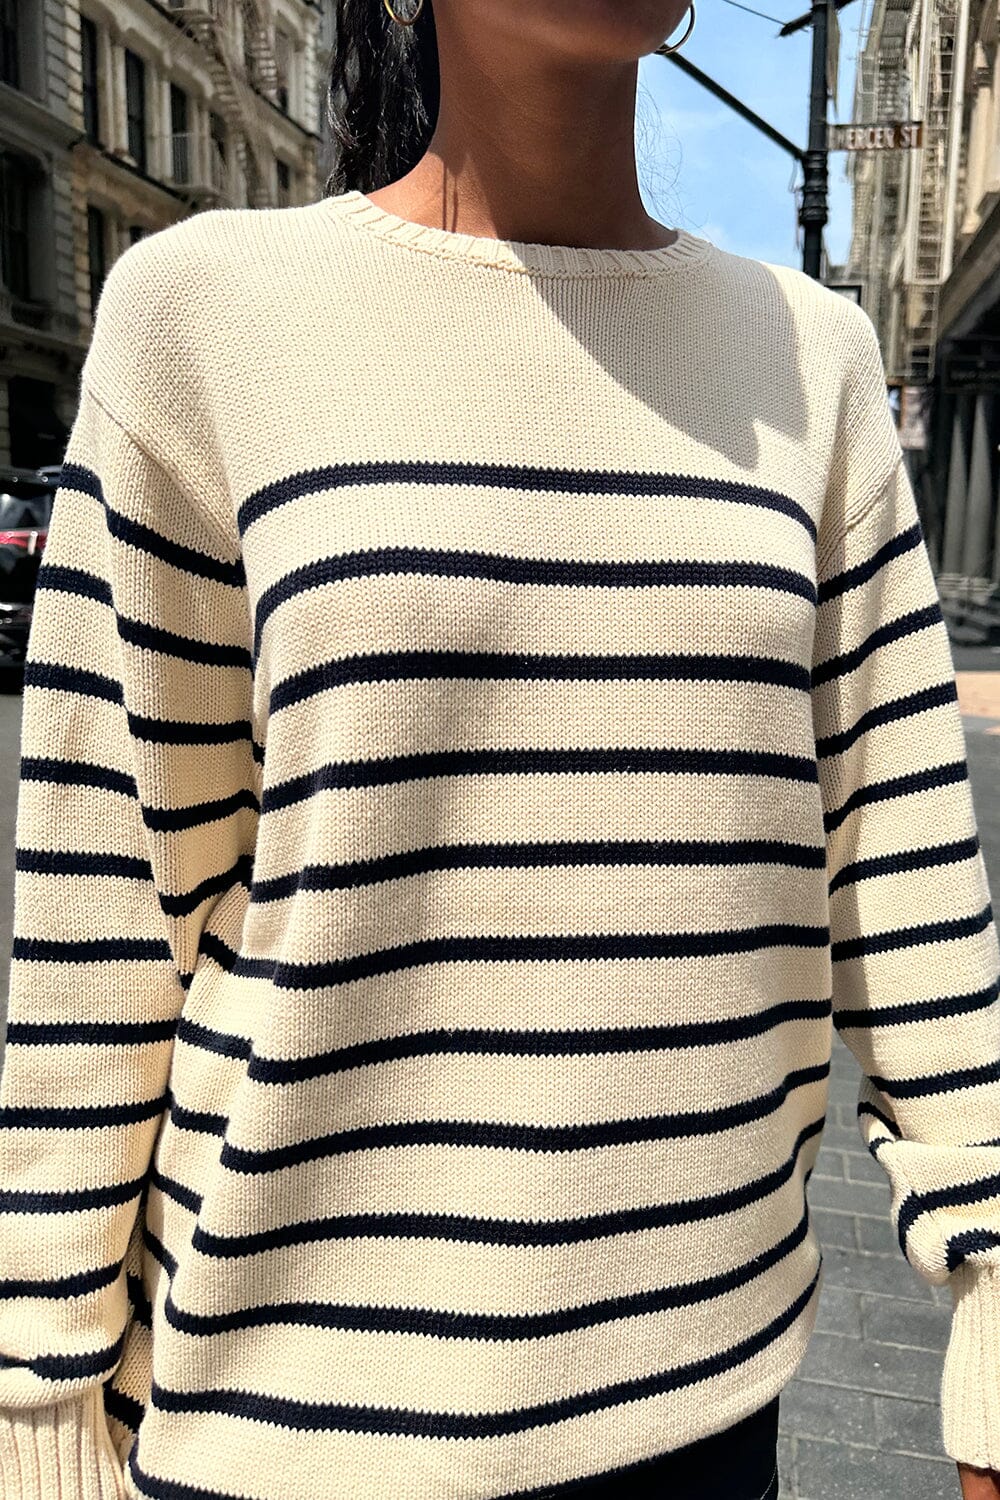 Cute Ivory Striped Sweater - Knit Sweater - Pullover Sweater Top